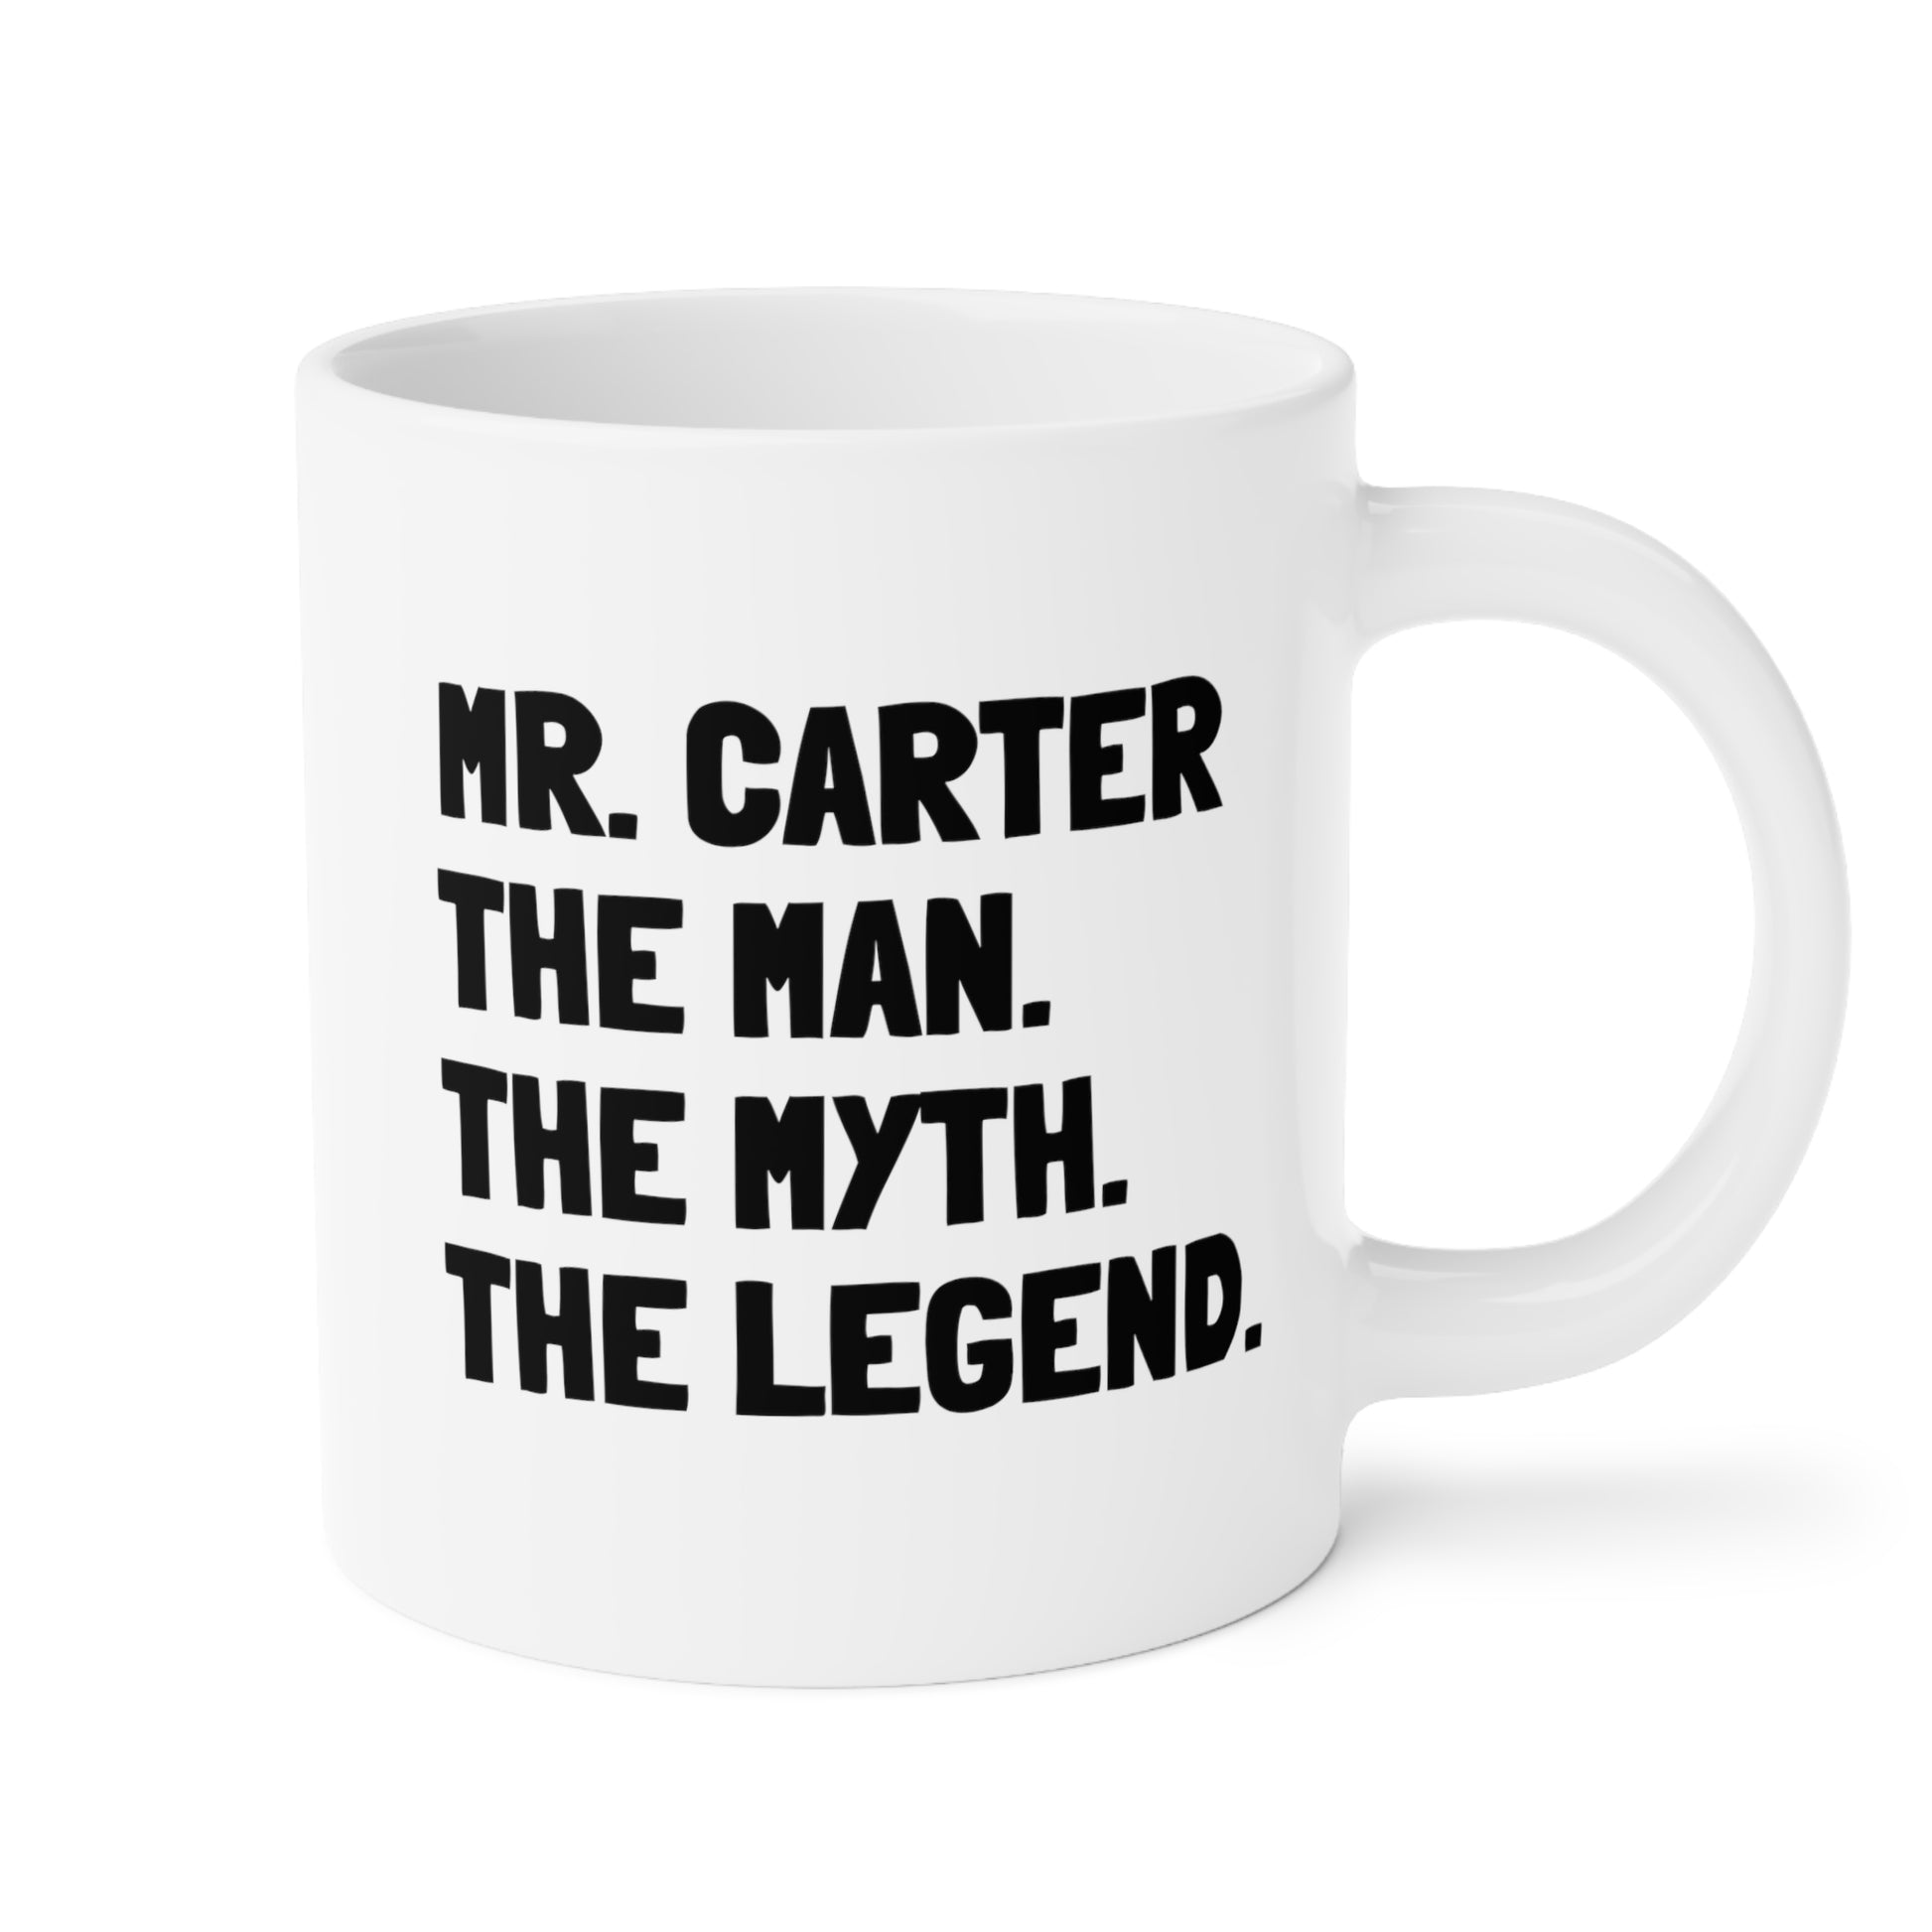 Mr. Carter The Man. The Myth. The Legend. 20oz white funny large coffee mug gift for male teacher end of year appreciation custom name waveywares wavey wares wavywares wavy wares